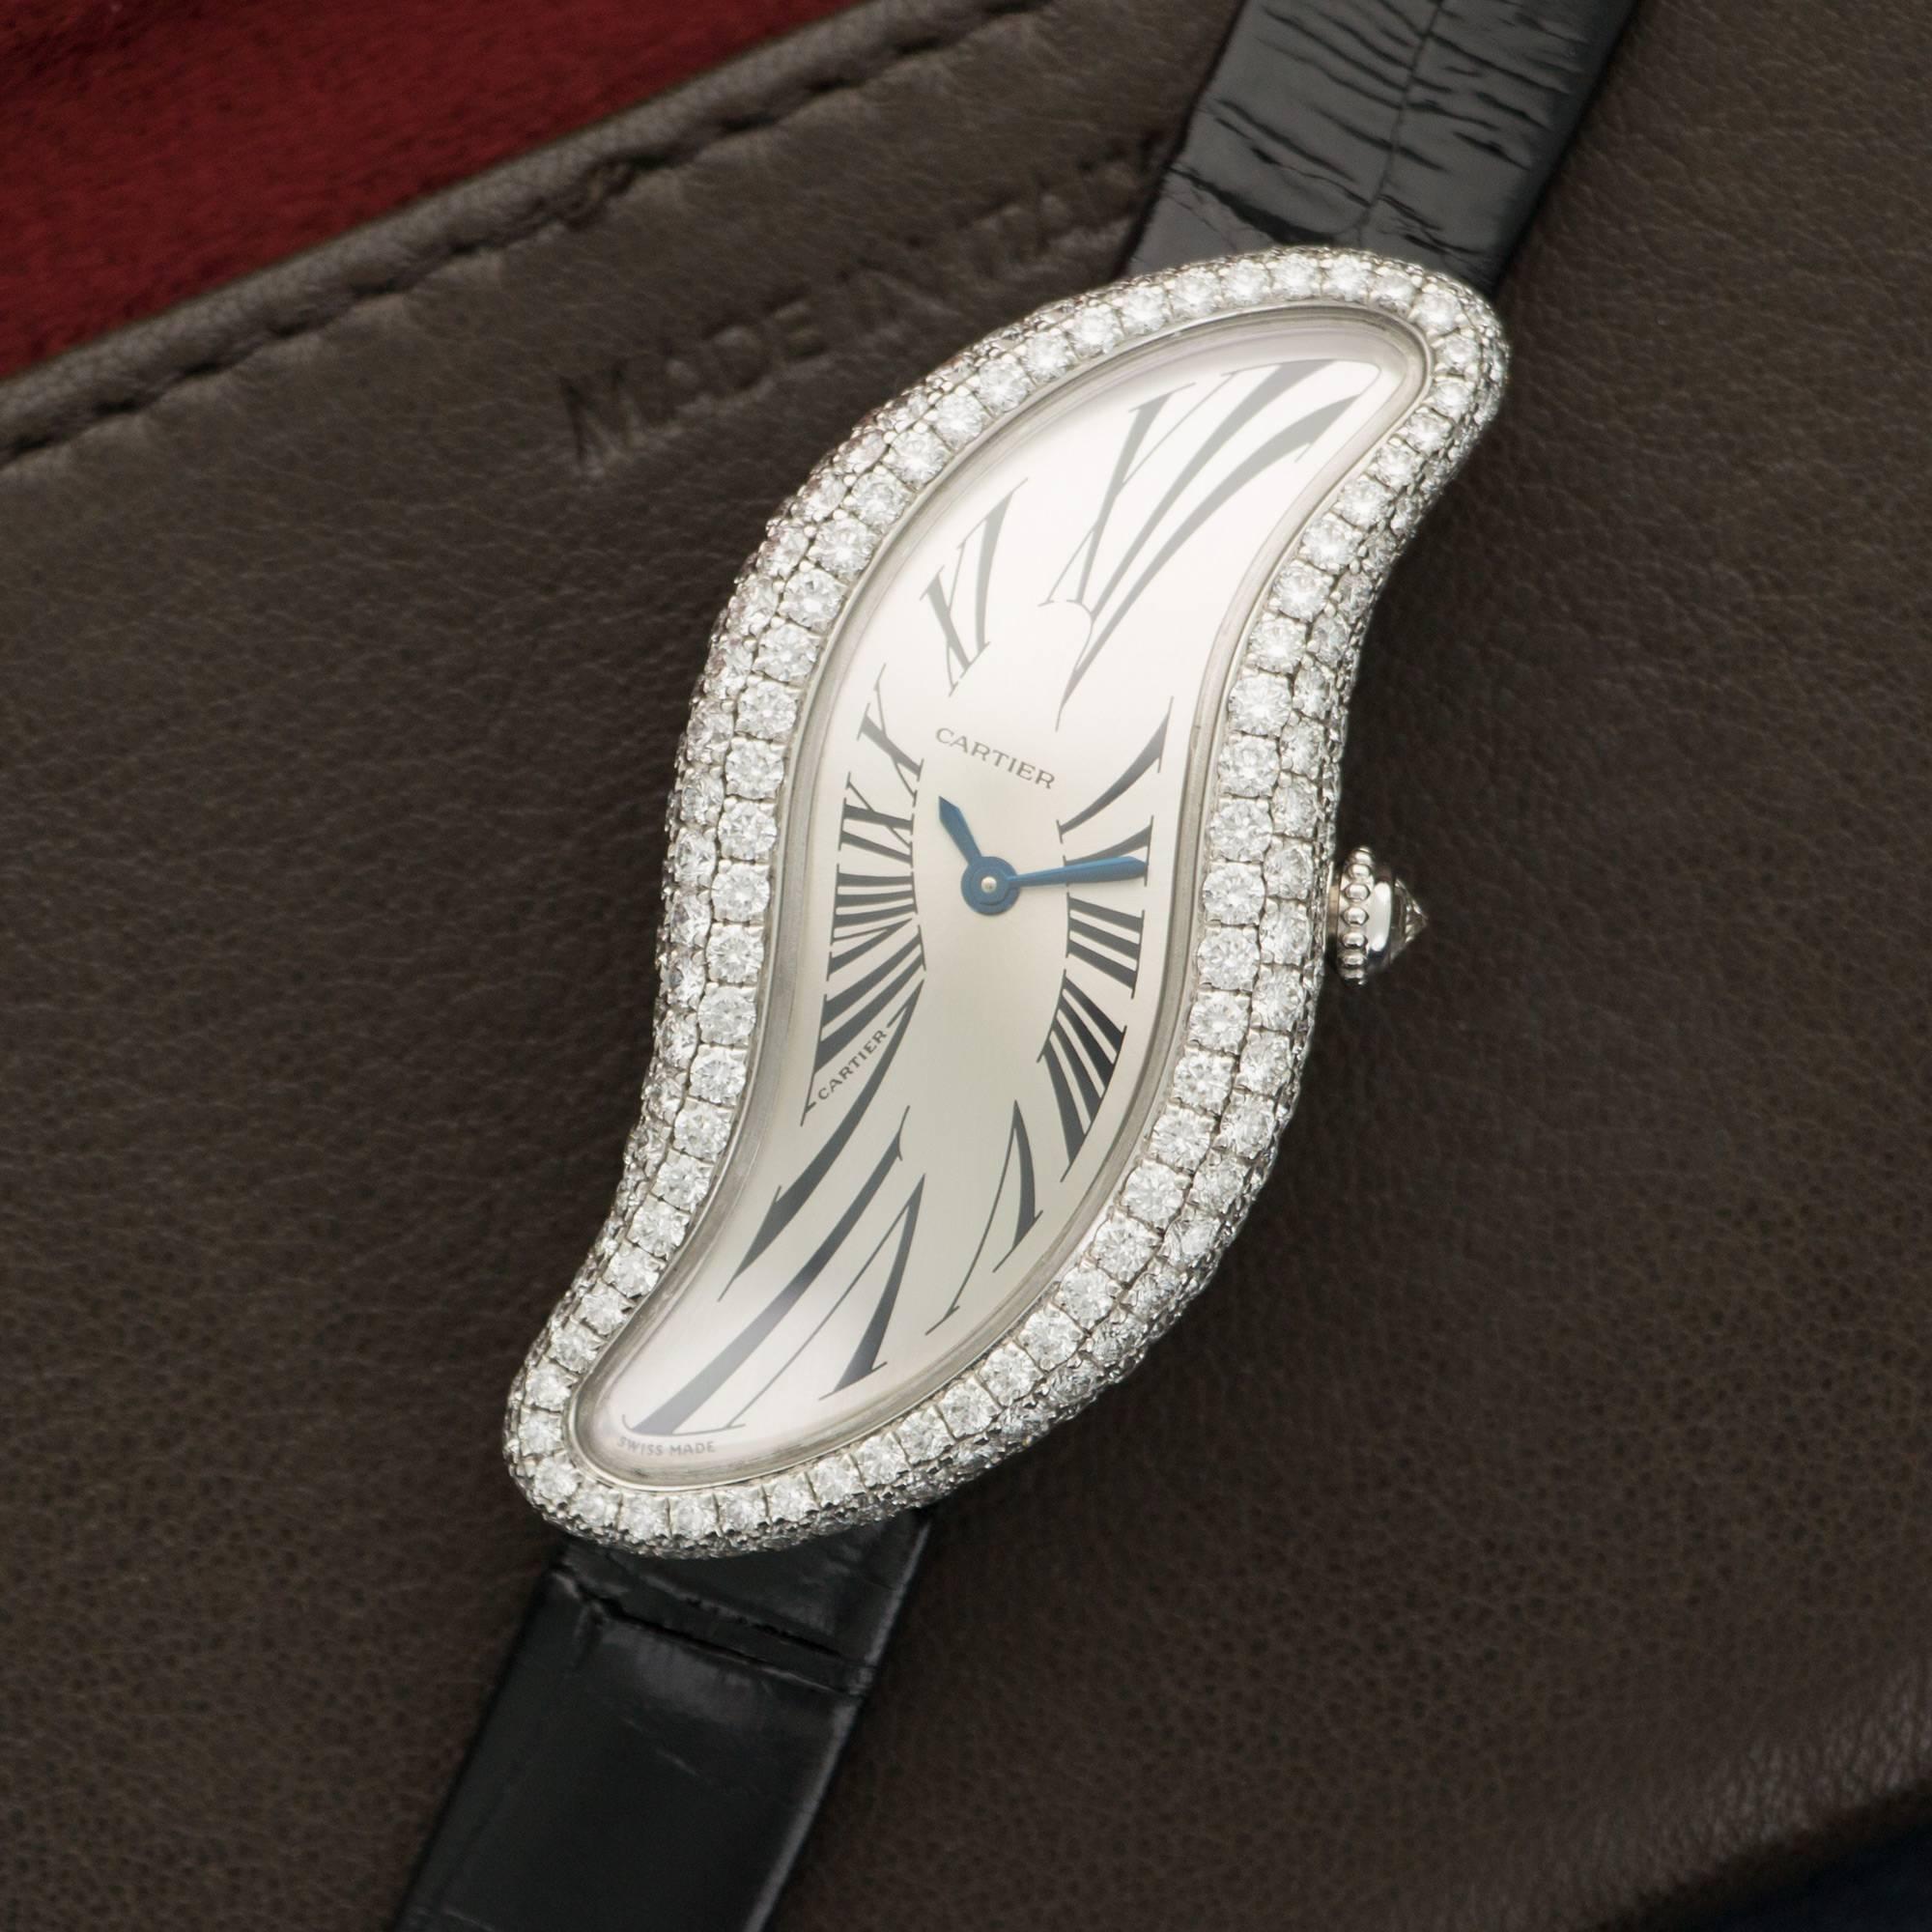 An 18k White Gold S-Shape Watch, by Cartier. Salvador Dali Inspired Design. All Original Diamonds. Manual-Winding. Reference number 3174. Mint Original Condition. 